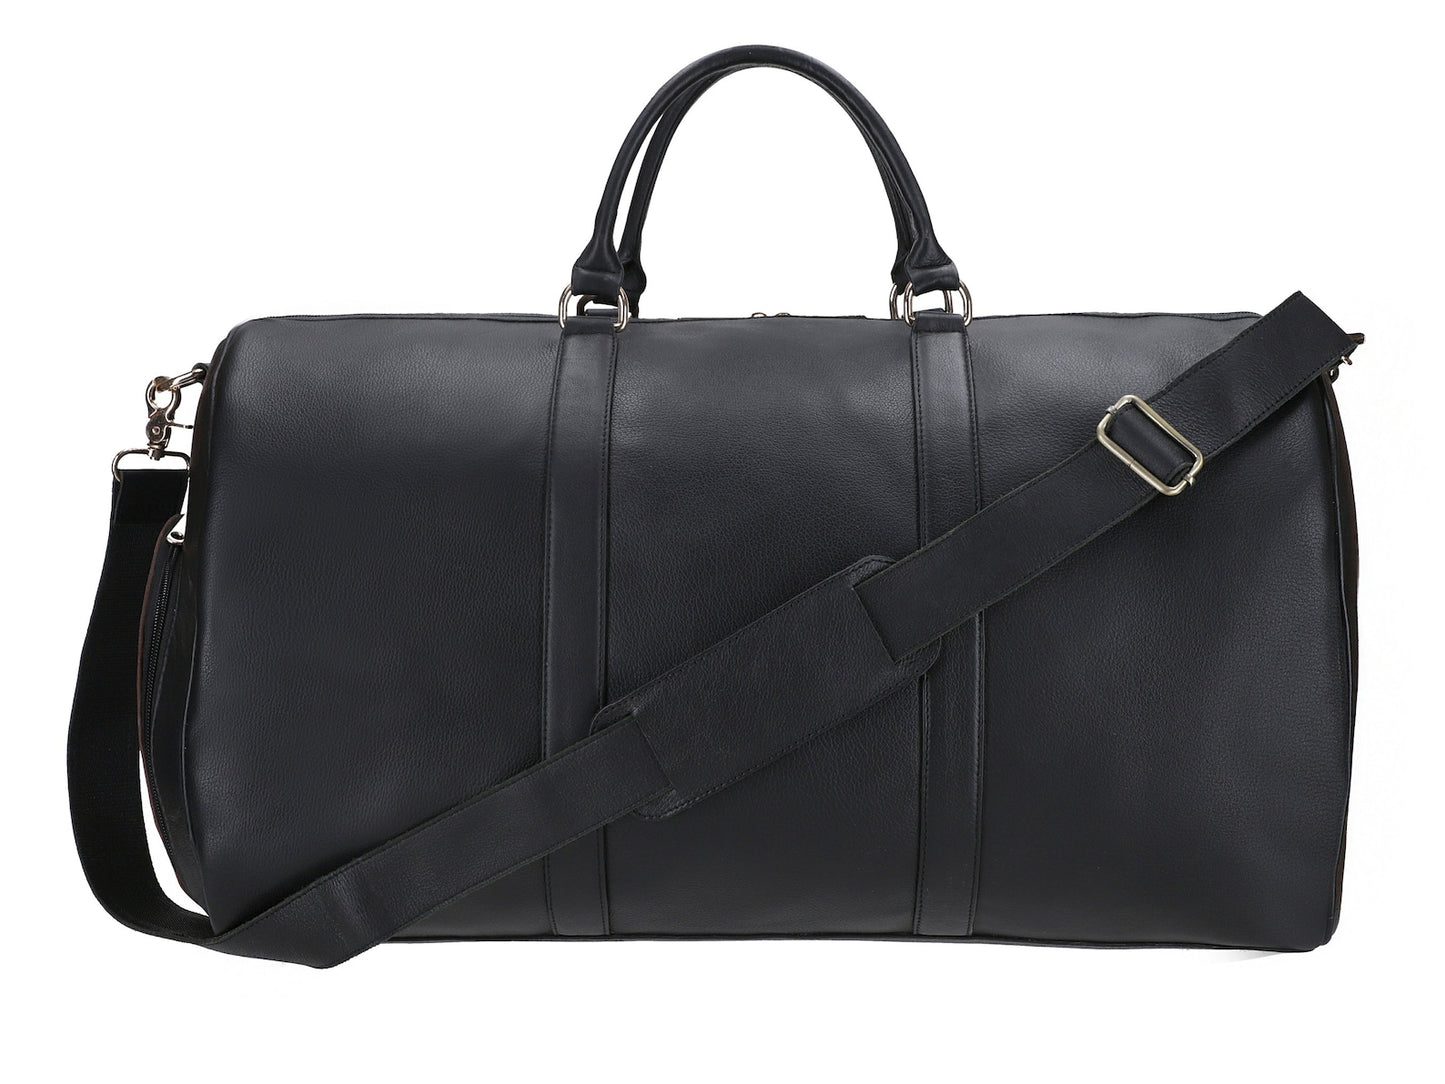 Genuine Black Leather Travel Bag With Shoe Compartment